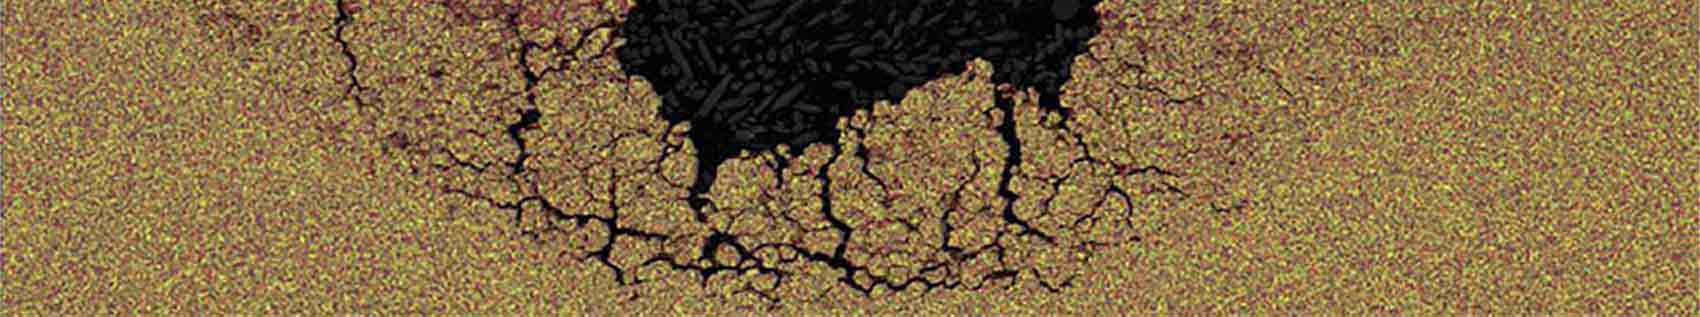 Scanning Elecctron Microscopy image of a corroded pit